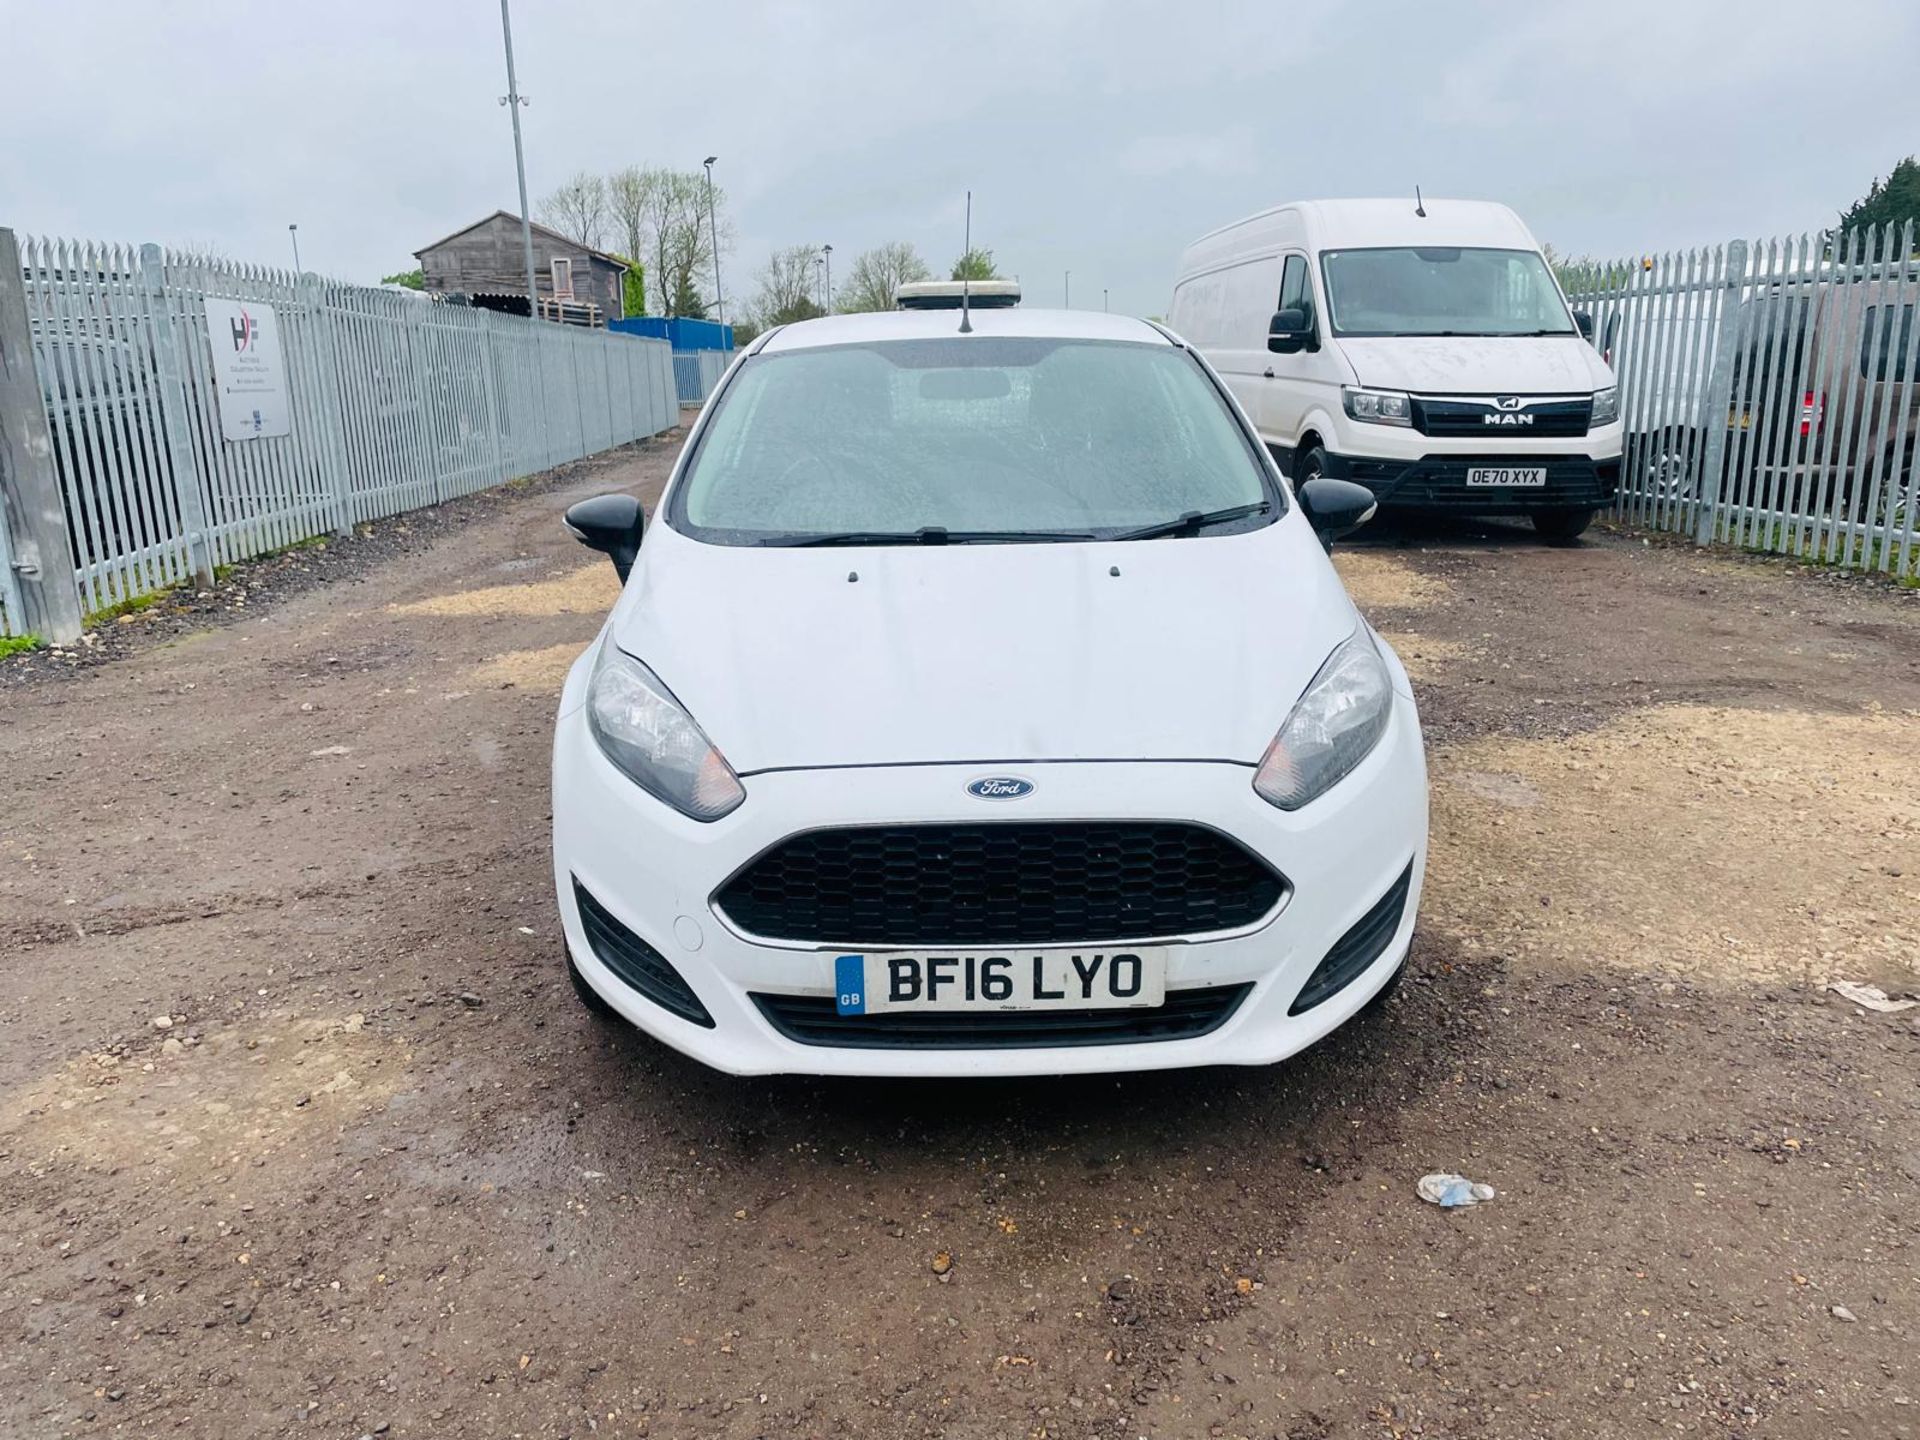 ** ON SALE ** Ford Fiesta 1.5 TDCI EcoNetic 2016 '16 Reg' Very Economical - Parking Sensors - Image 2 of 25